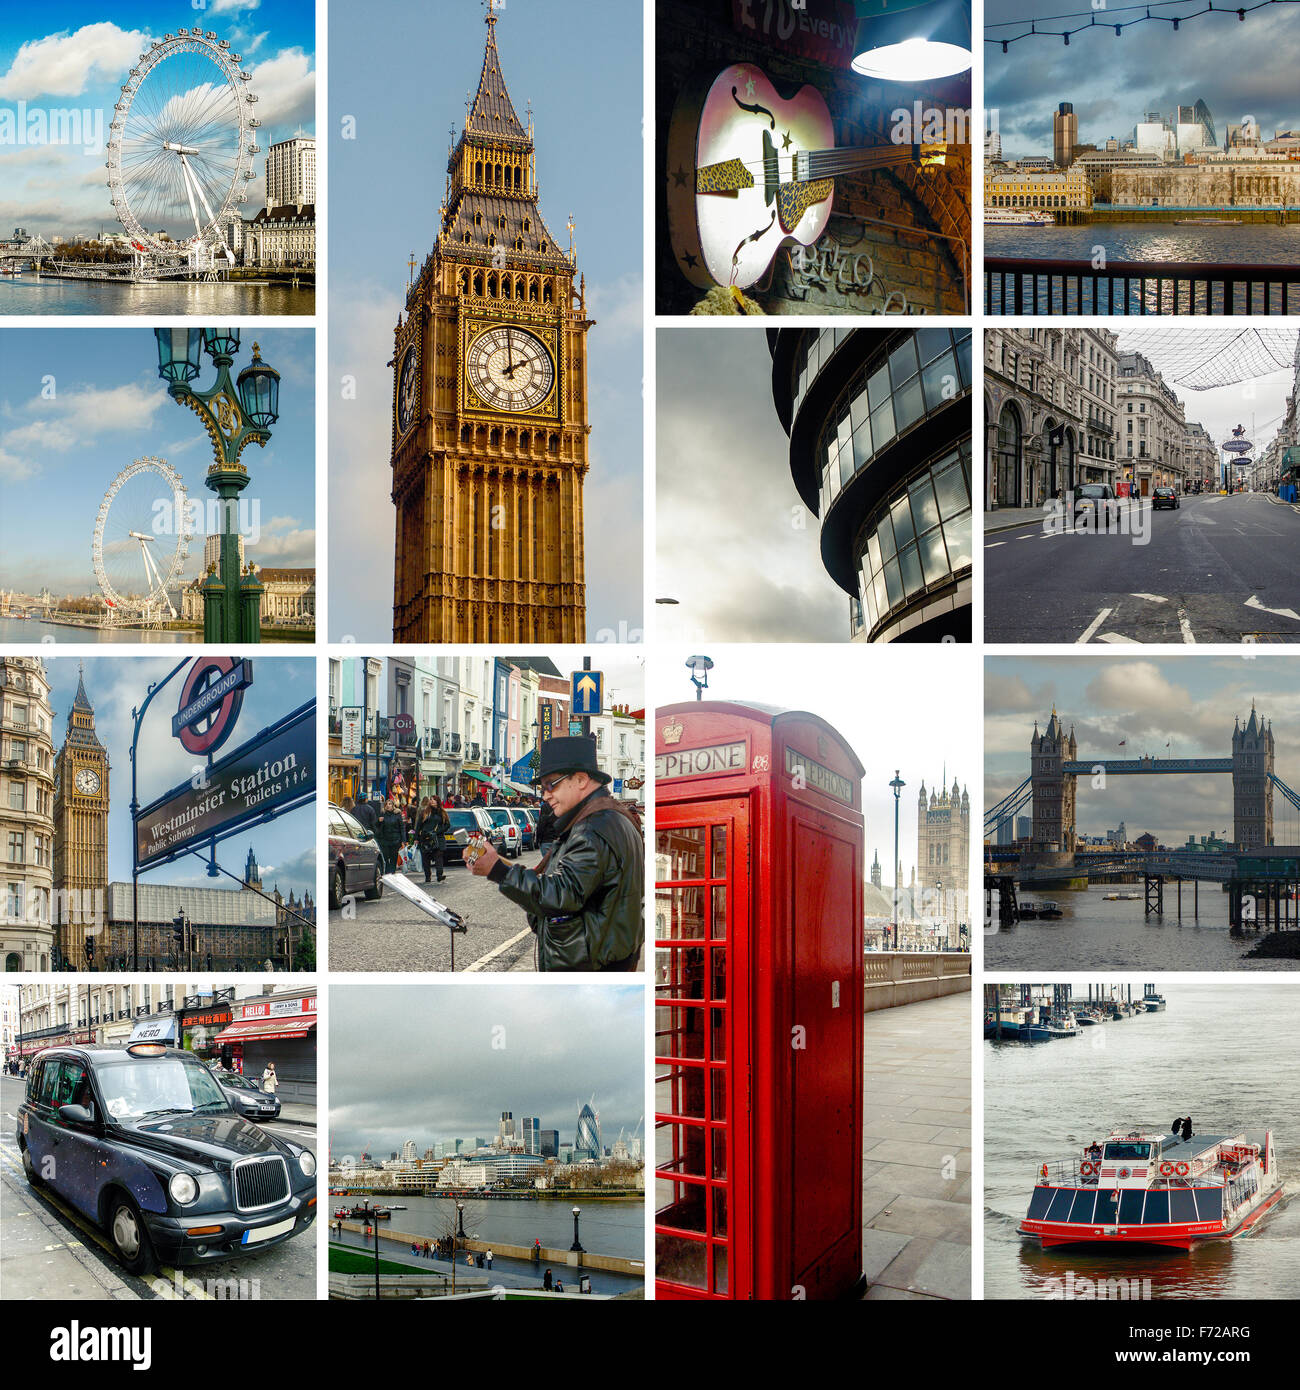 uk tourist attractions collage